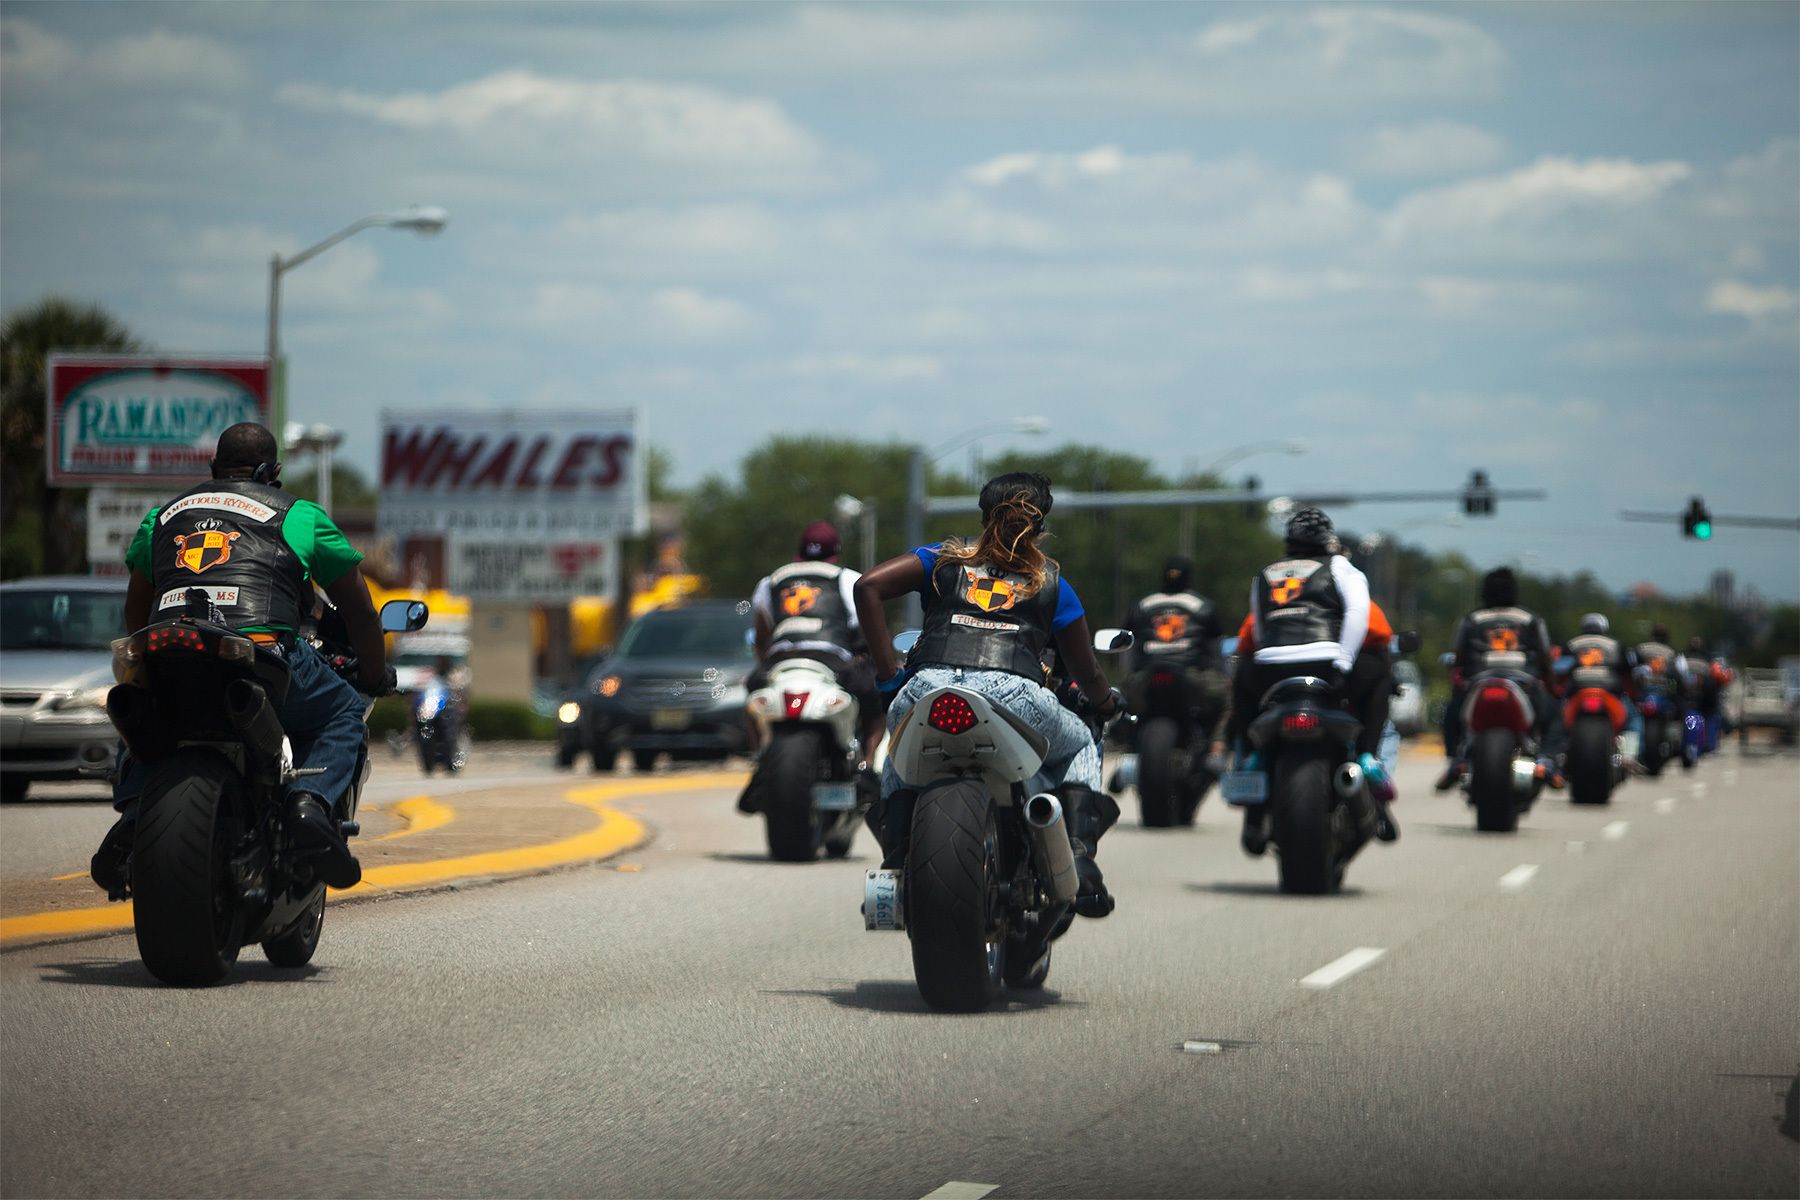 Bikers cruise down Kings Highway during the 2015 Atlantic Beach Memorial Day BikeFest in Myrtle Beach, South Carolina May 22, 2015. After three people were killed and seven wounded in shootings during 2014 Bikefest, State officials called for an end to the event that draws thousands to the family-friendly beach town.Their efforts were unsuccessful. Bikers returned to Myrtle Beach - just a week after a bloody motorcycle gang shootout in Waco, Texas. But this time authorities are more prepared, with dozens of new surveillance cameras and a police force three times the size of last year’s.    REUTERS/Randall Hill